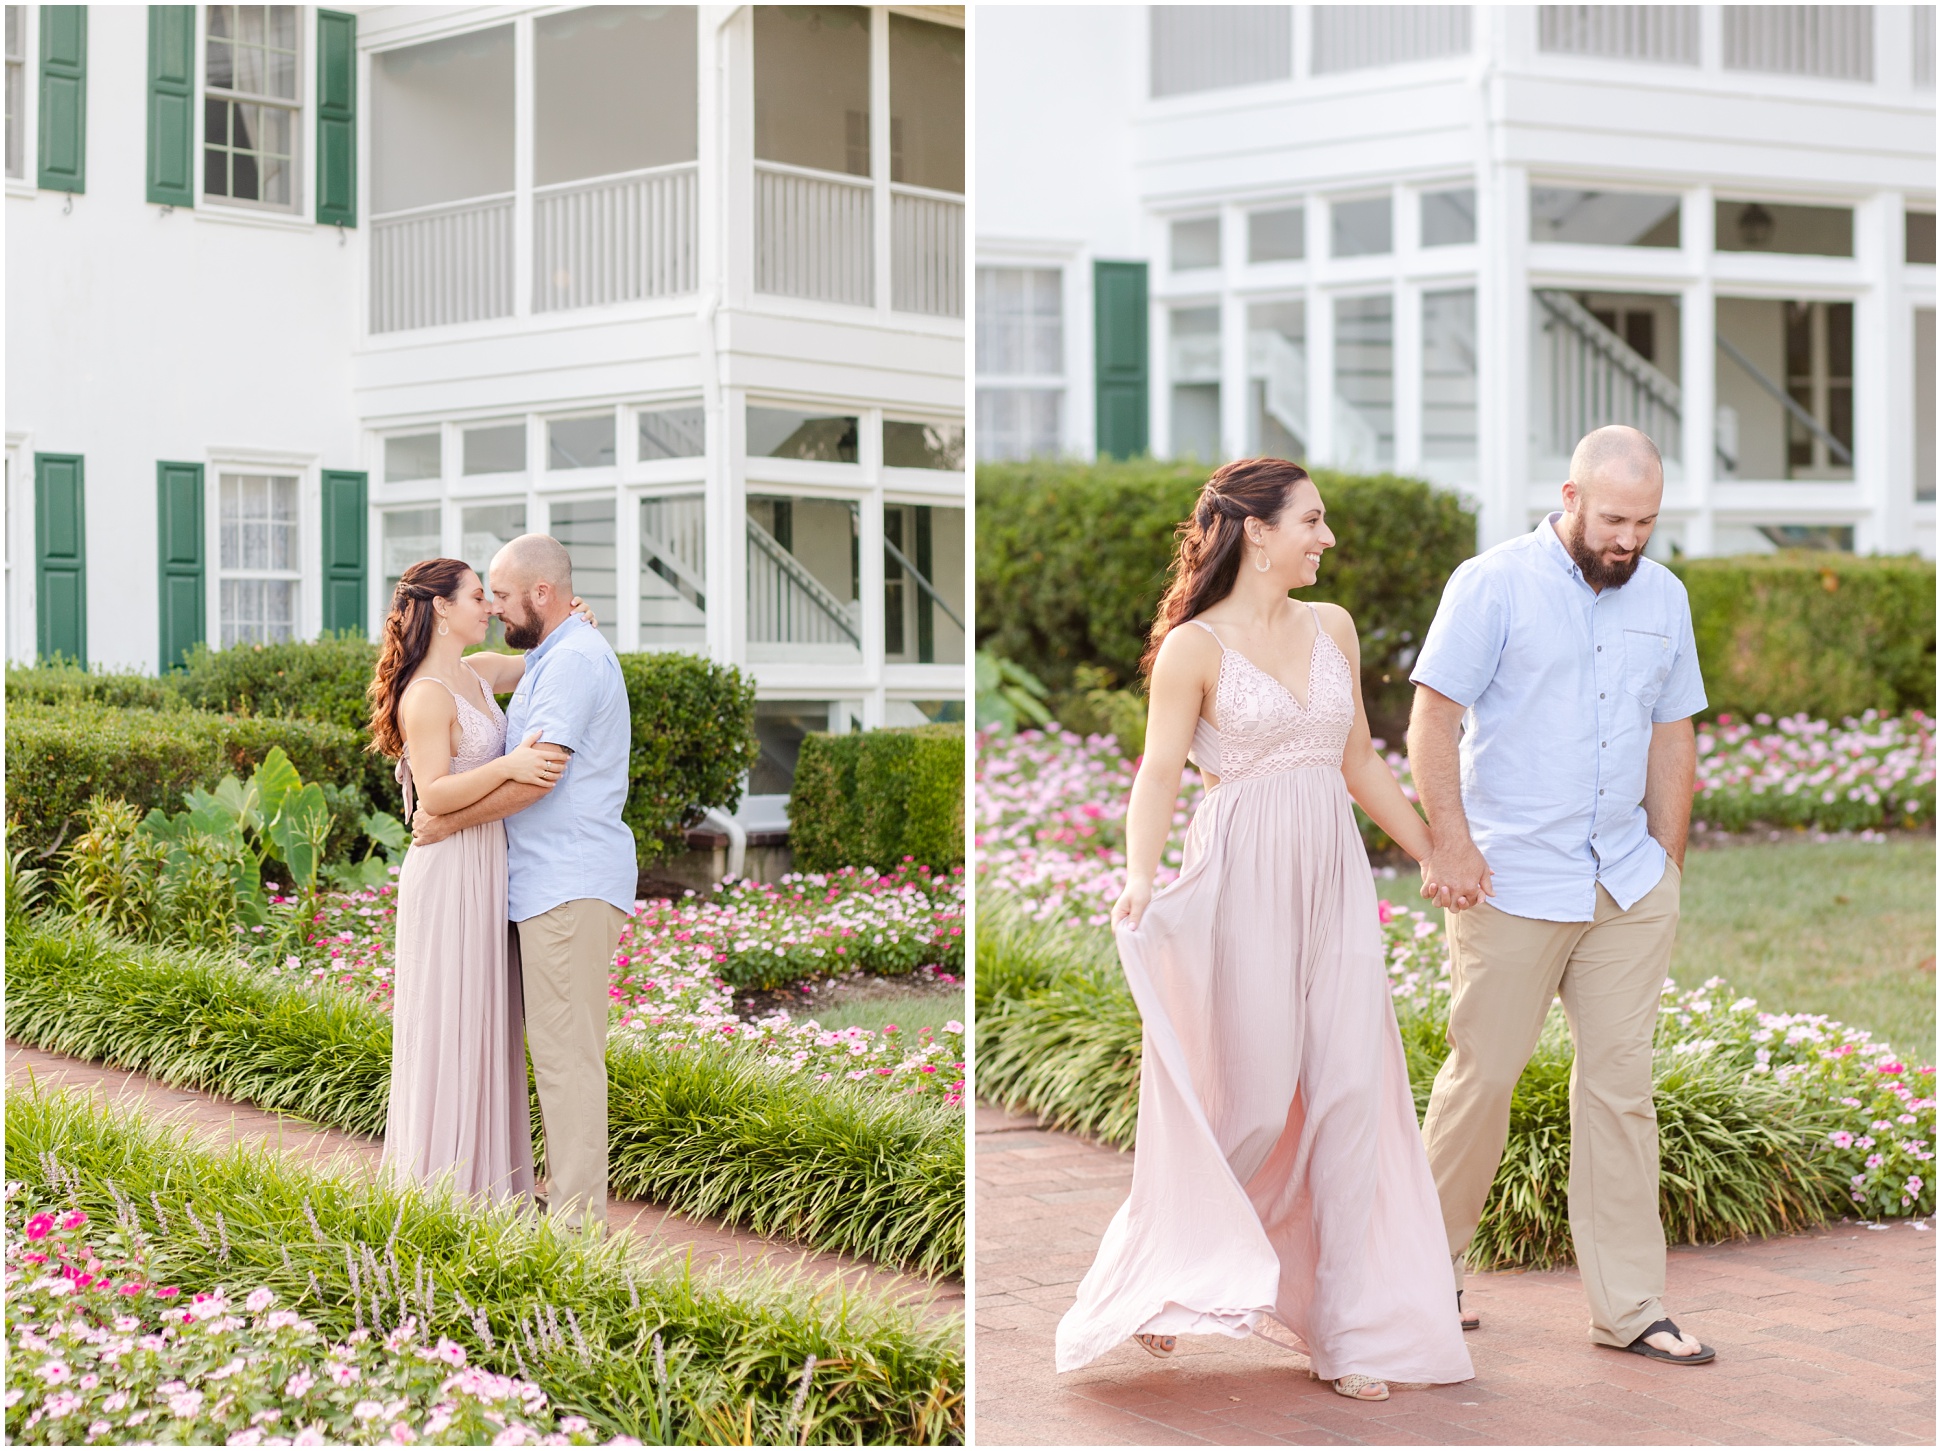 Left image: Couple standing chest to chest in the garden, right: couple walking hand in-hand down the brick pathway